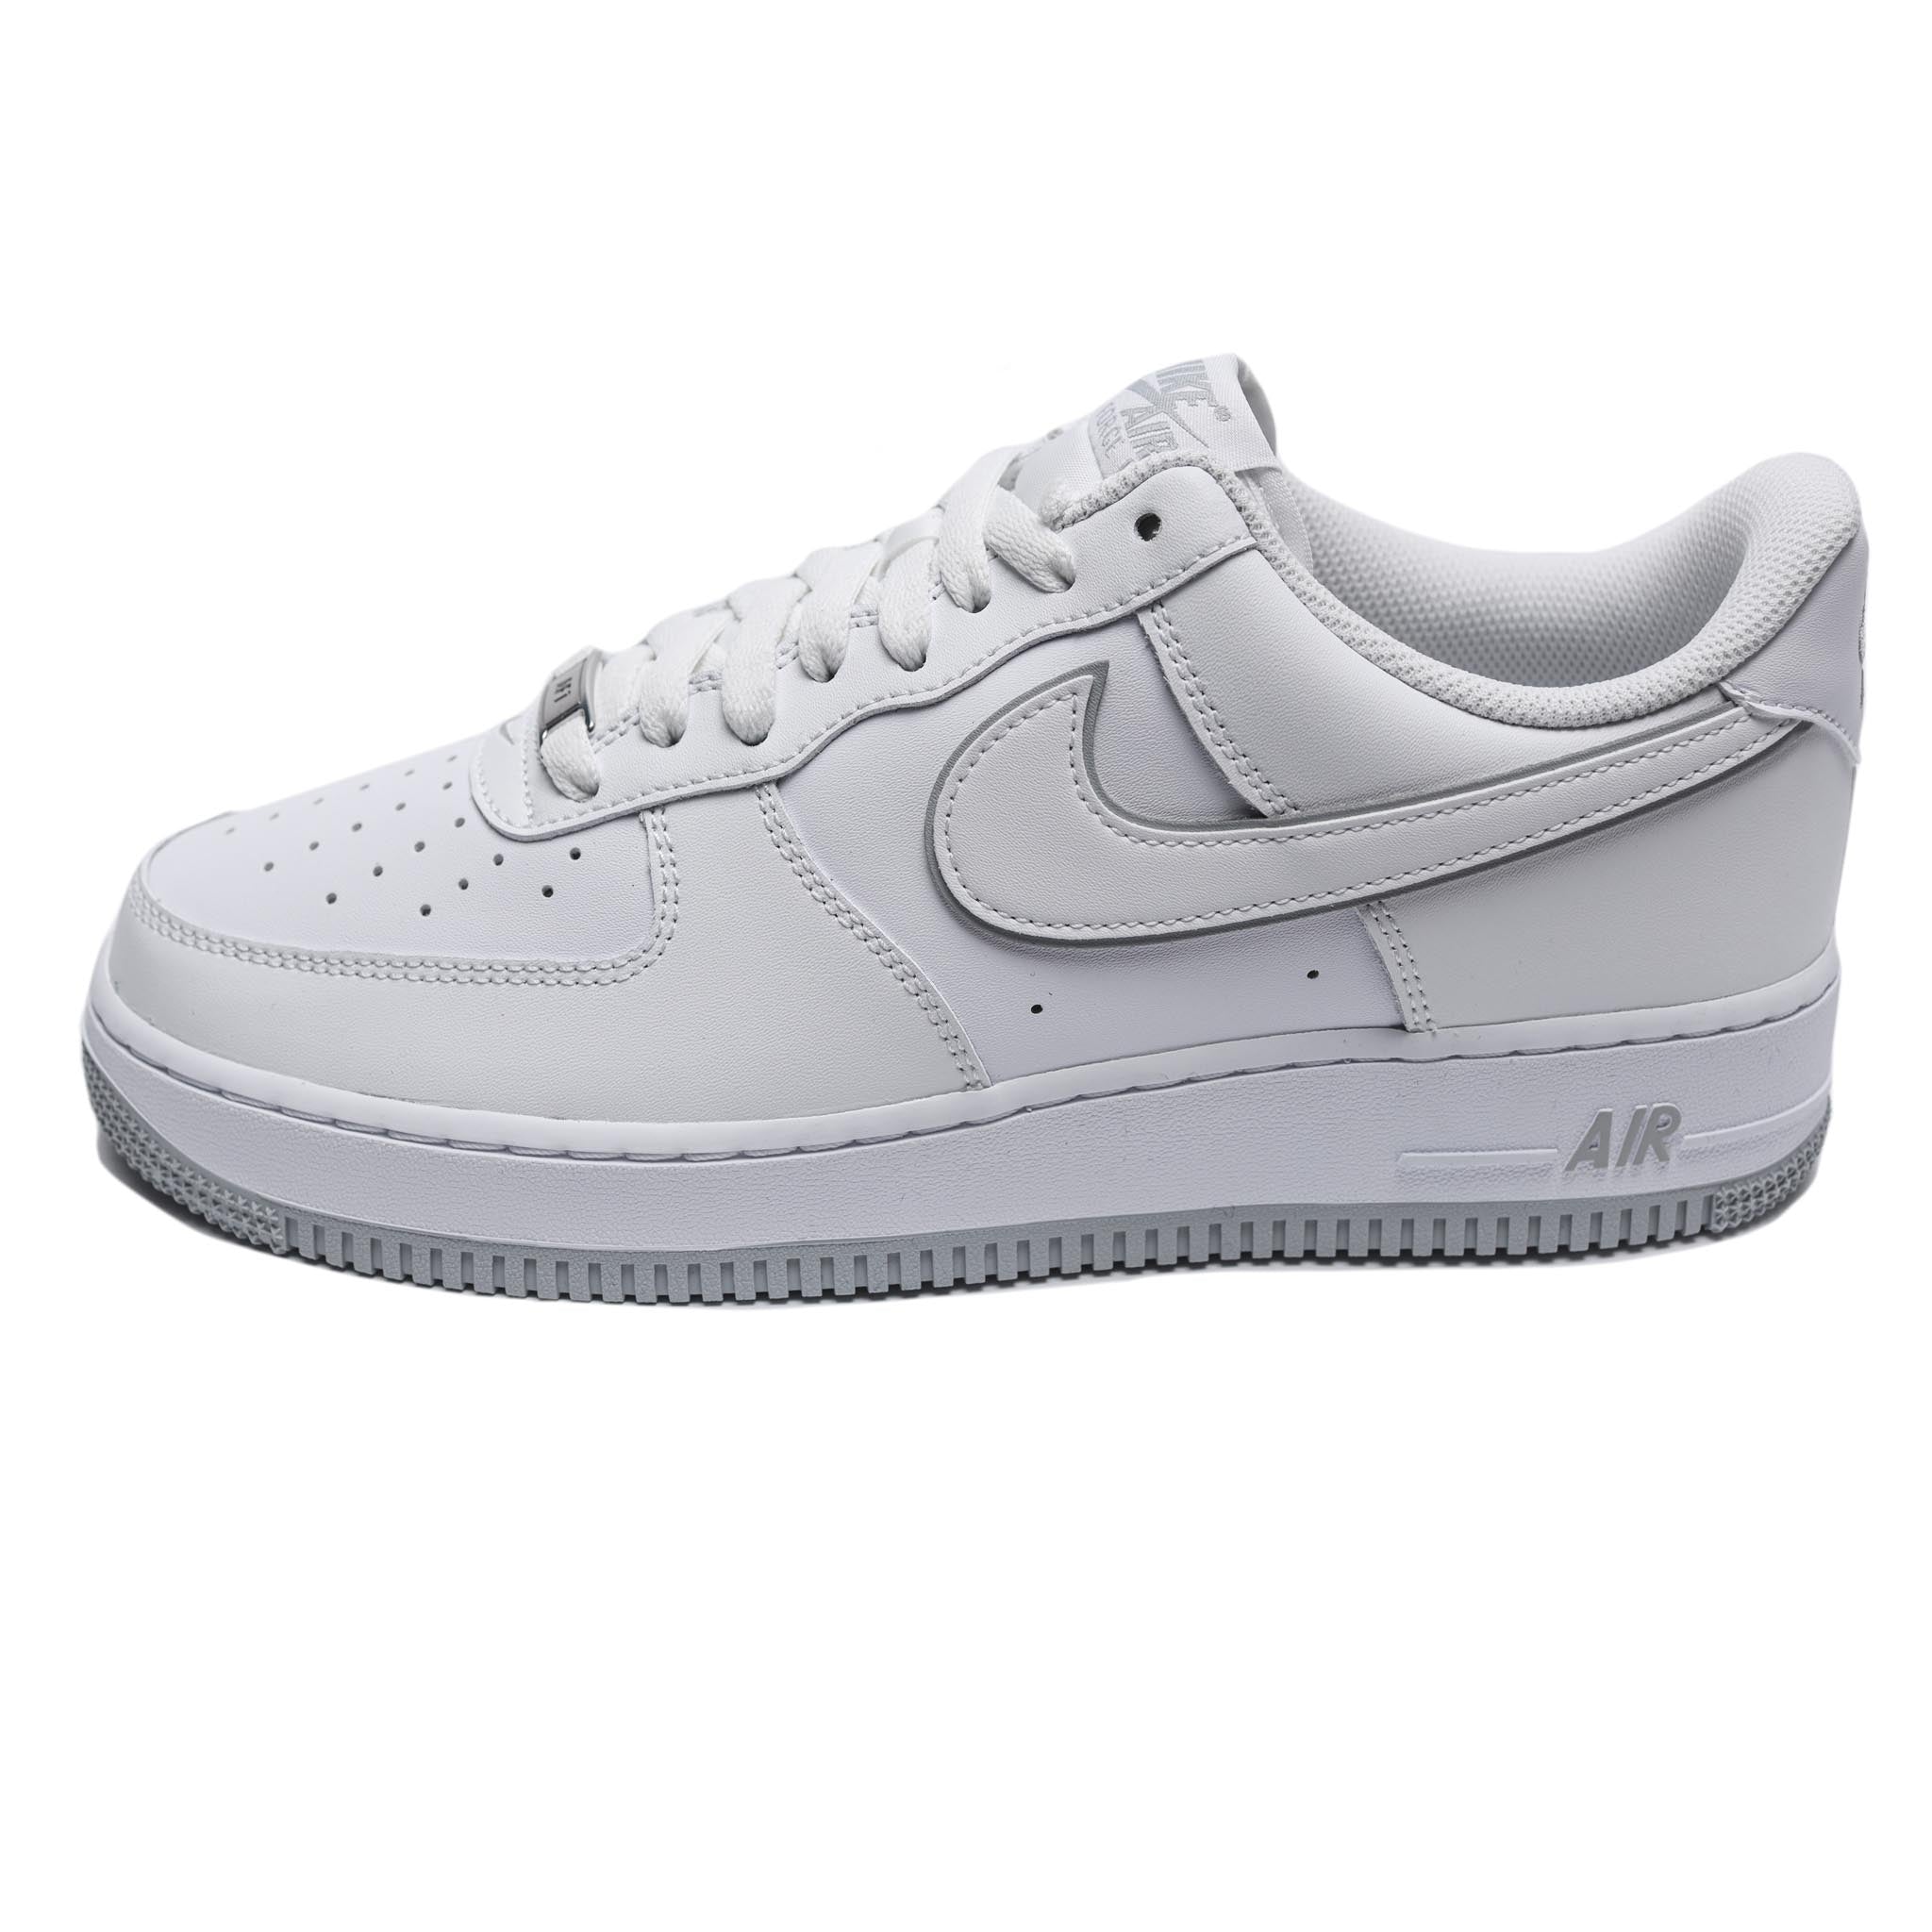 Air Force 1 Low ‘07 “Wolf Grey White”